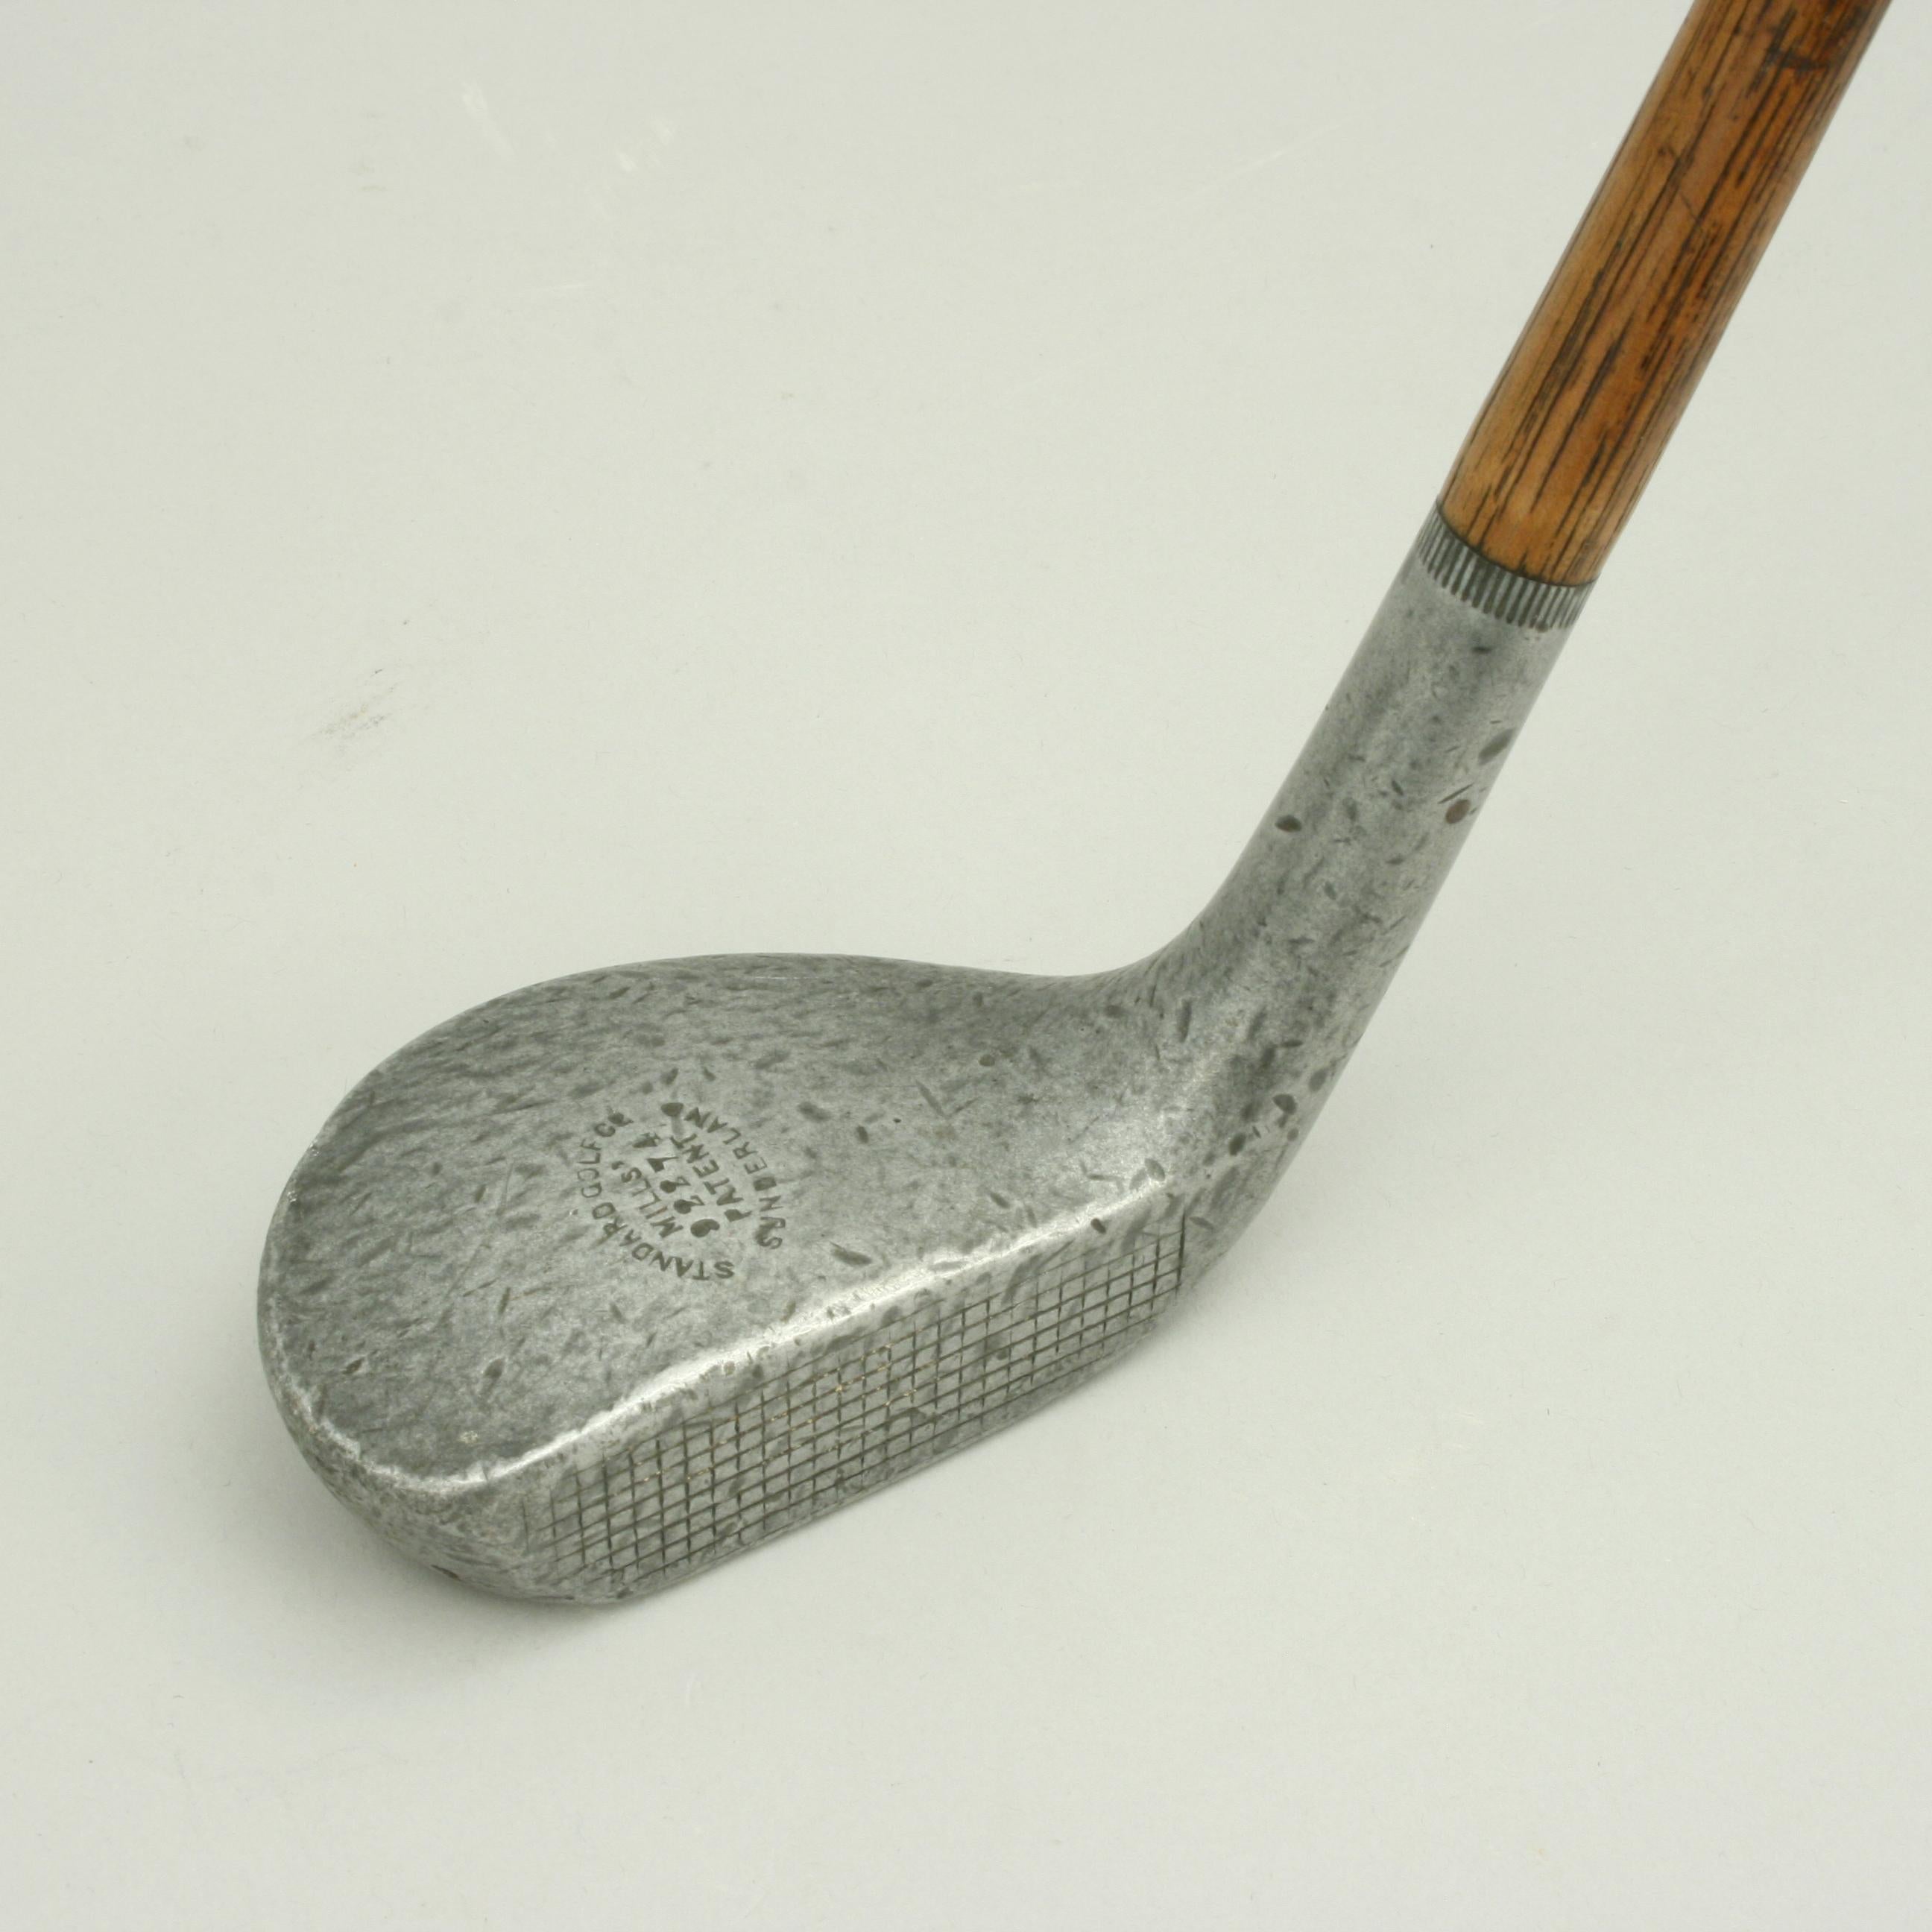 Early 20th Century Antique Hickory Golf Club, Mills Putter with Aluminium Head, Sunderland